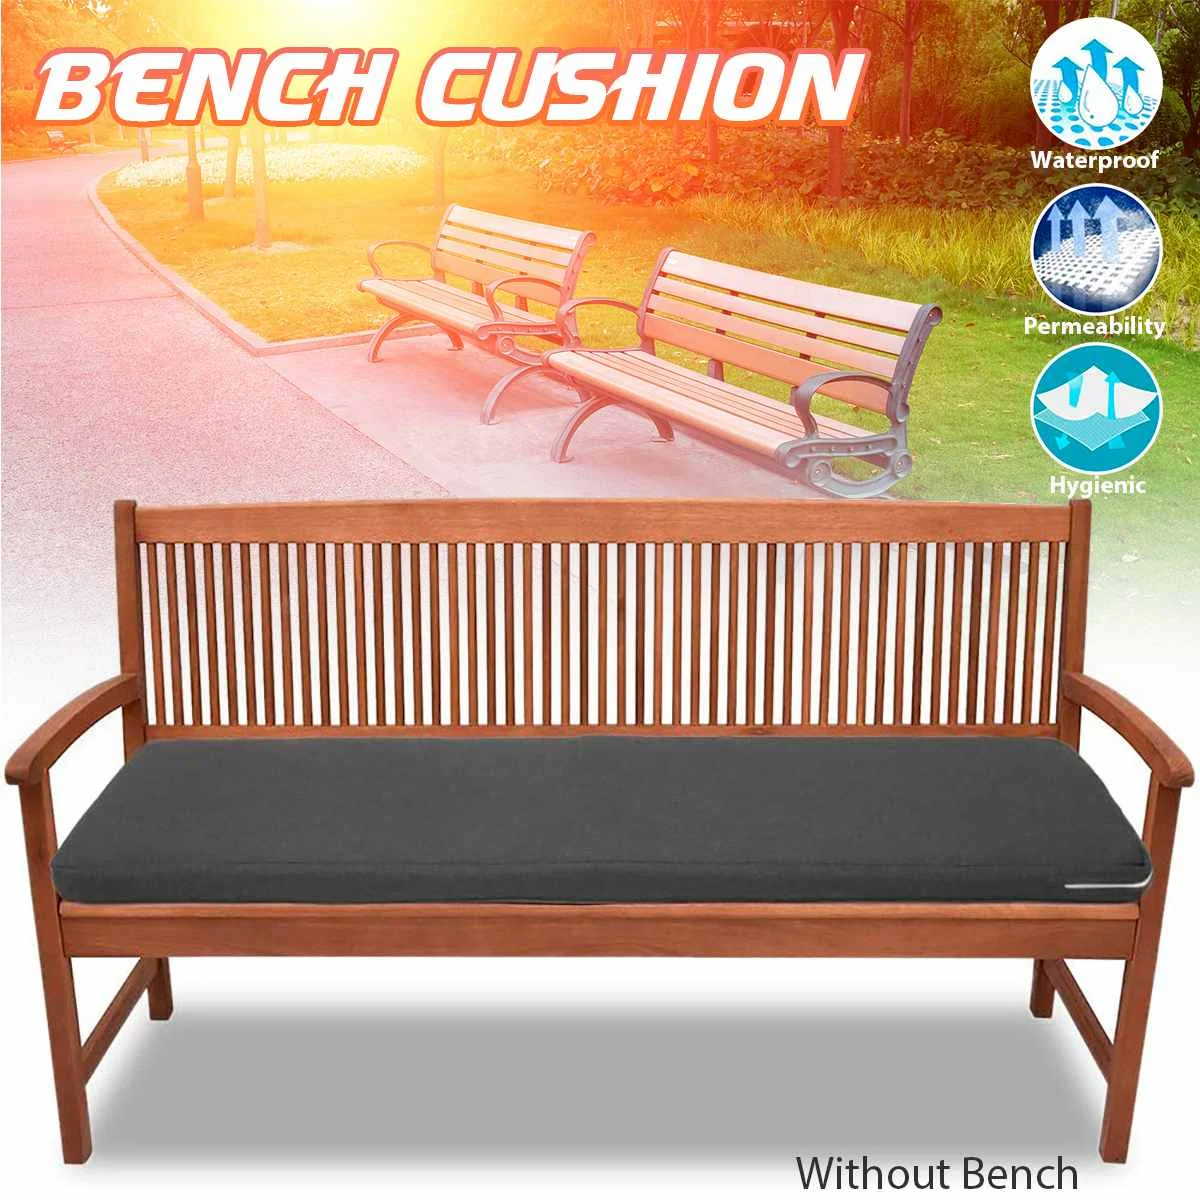 100/120/150cm Outdoor Solid Color Bench Cushion Waterproof Seat Pad with Bandage Garden Patio Furniture Chair Cushion No Chair